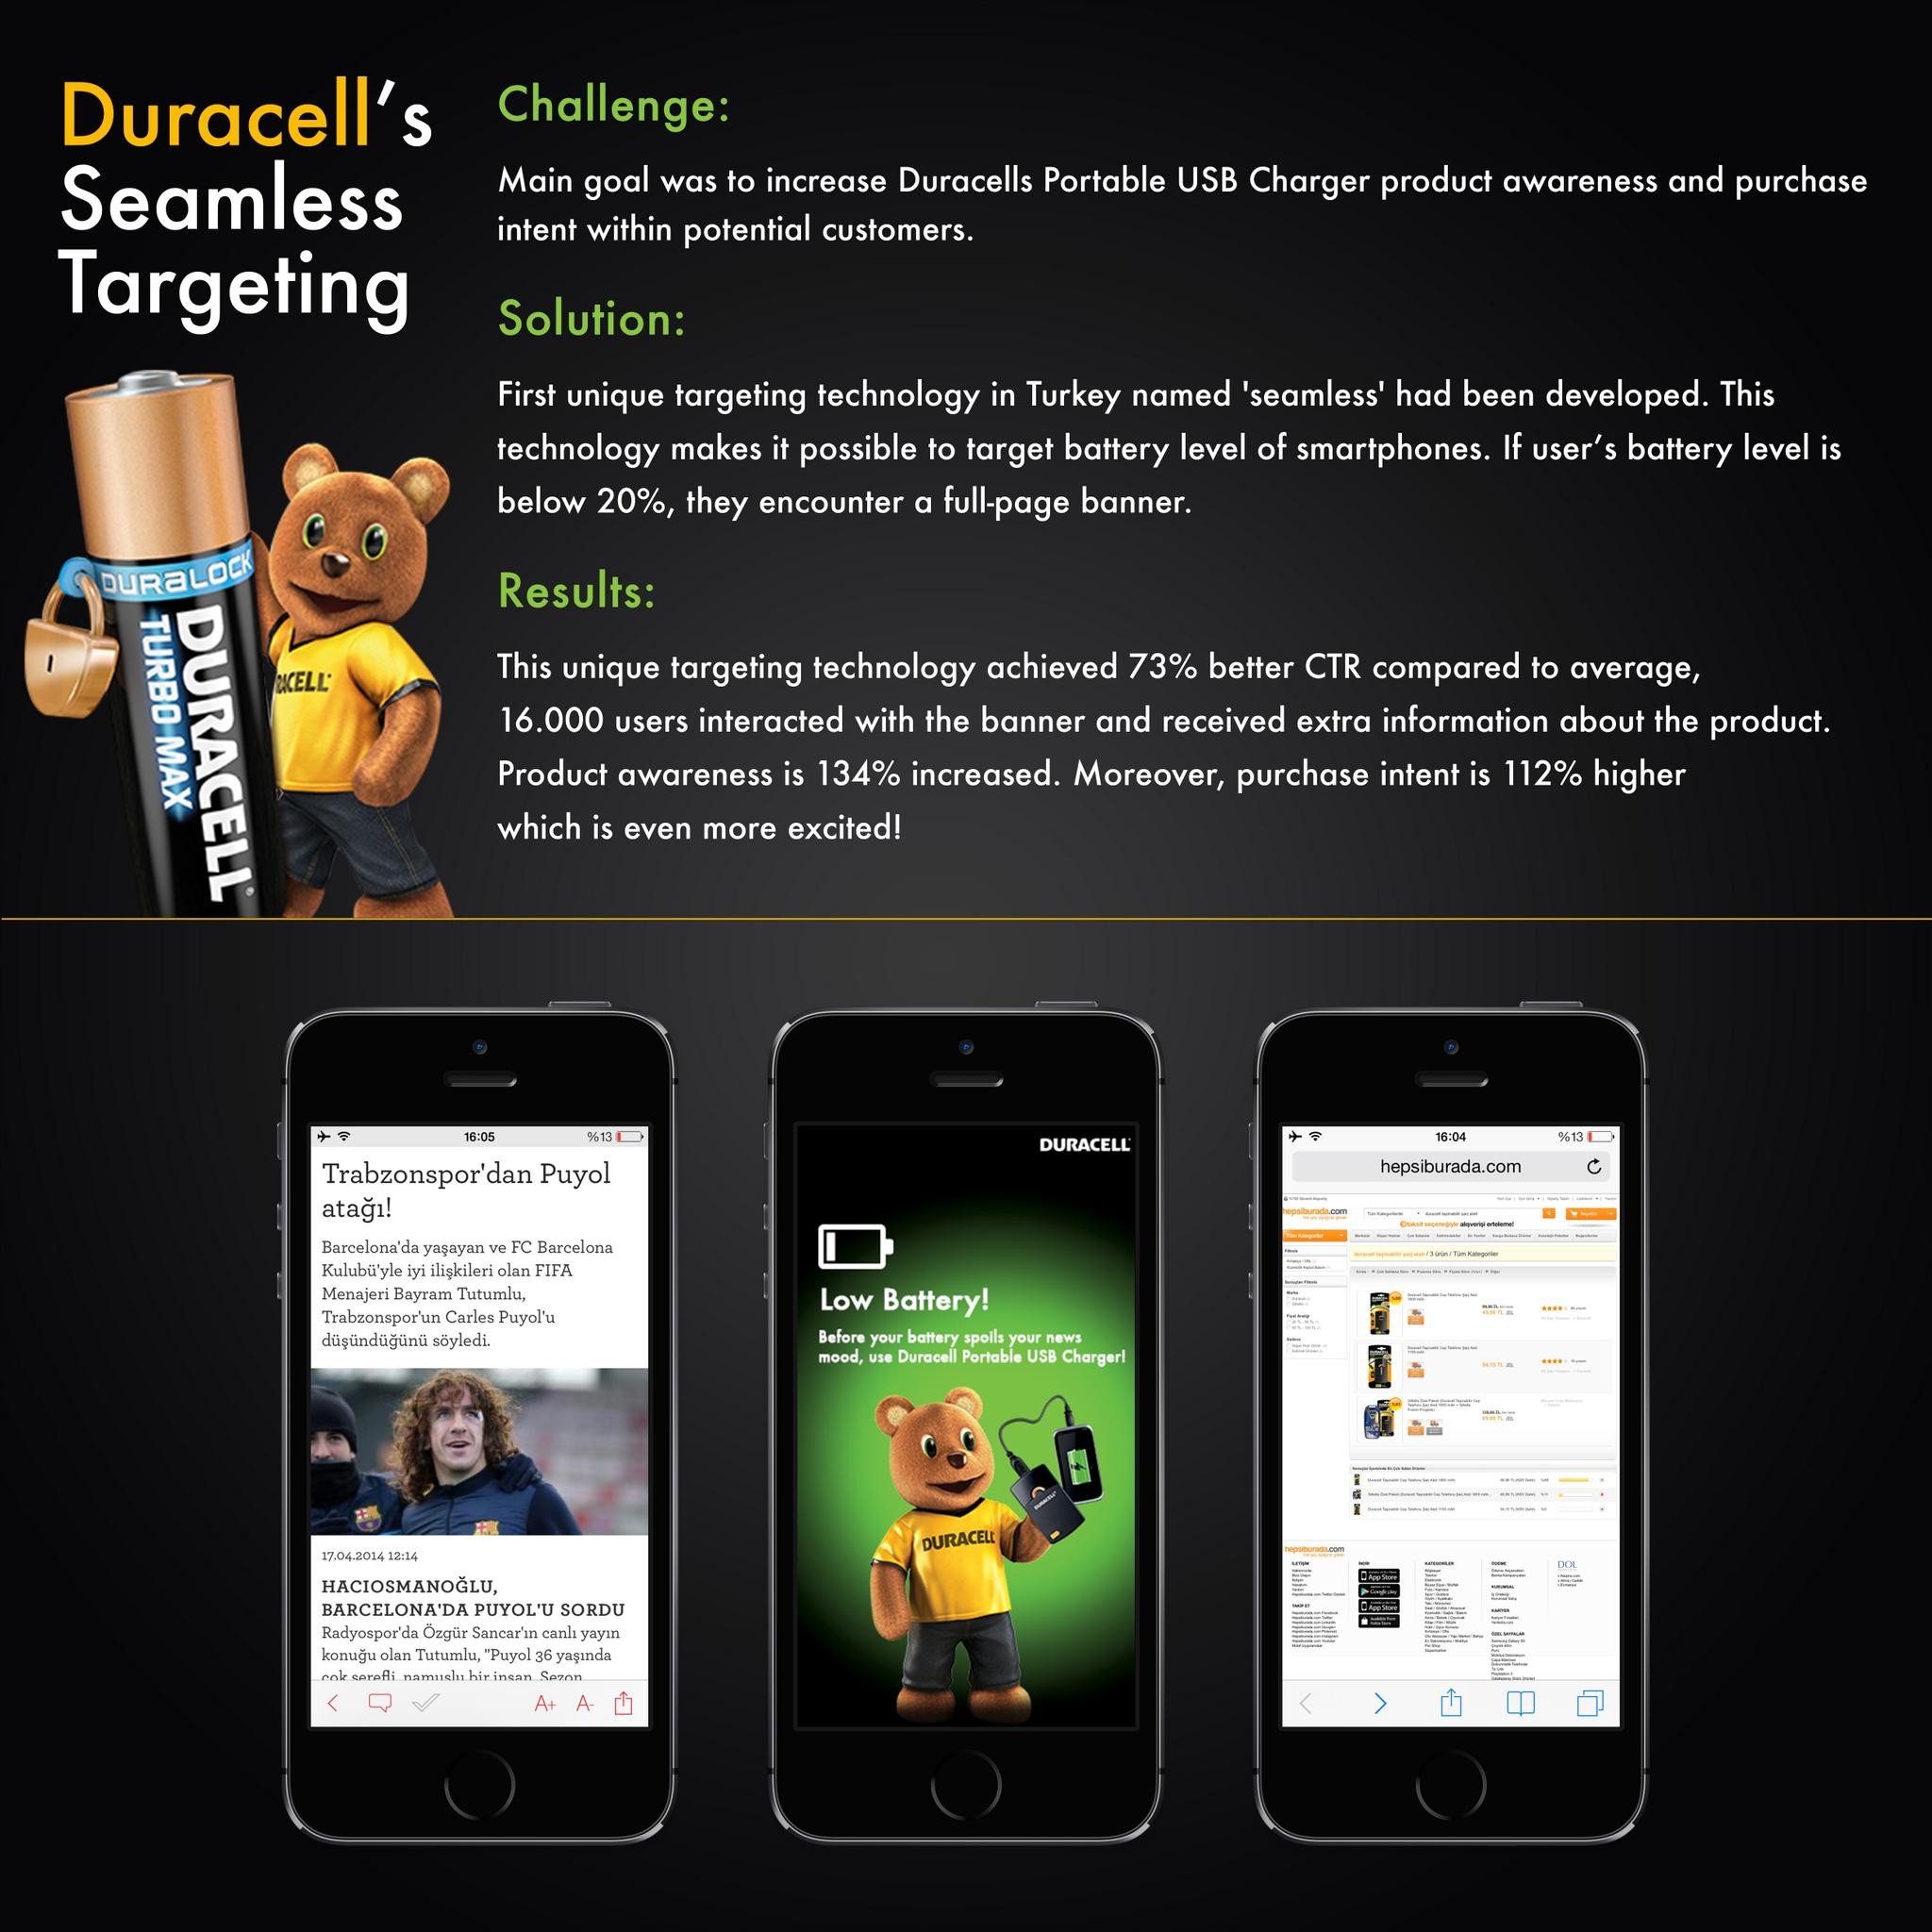 DURACELL’S SEAMLESS TARGETING